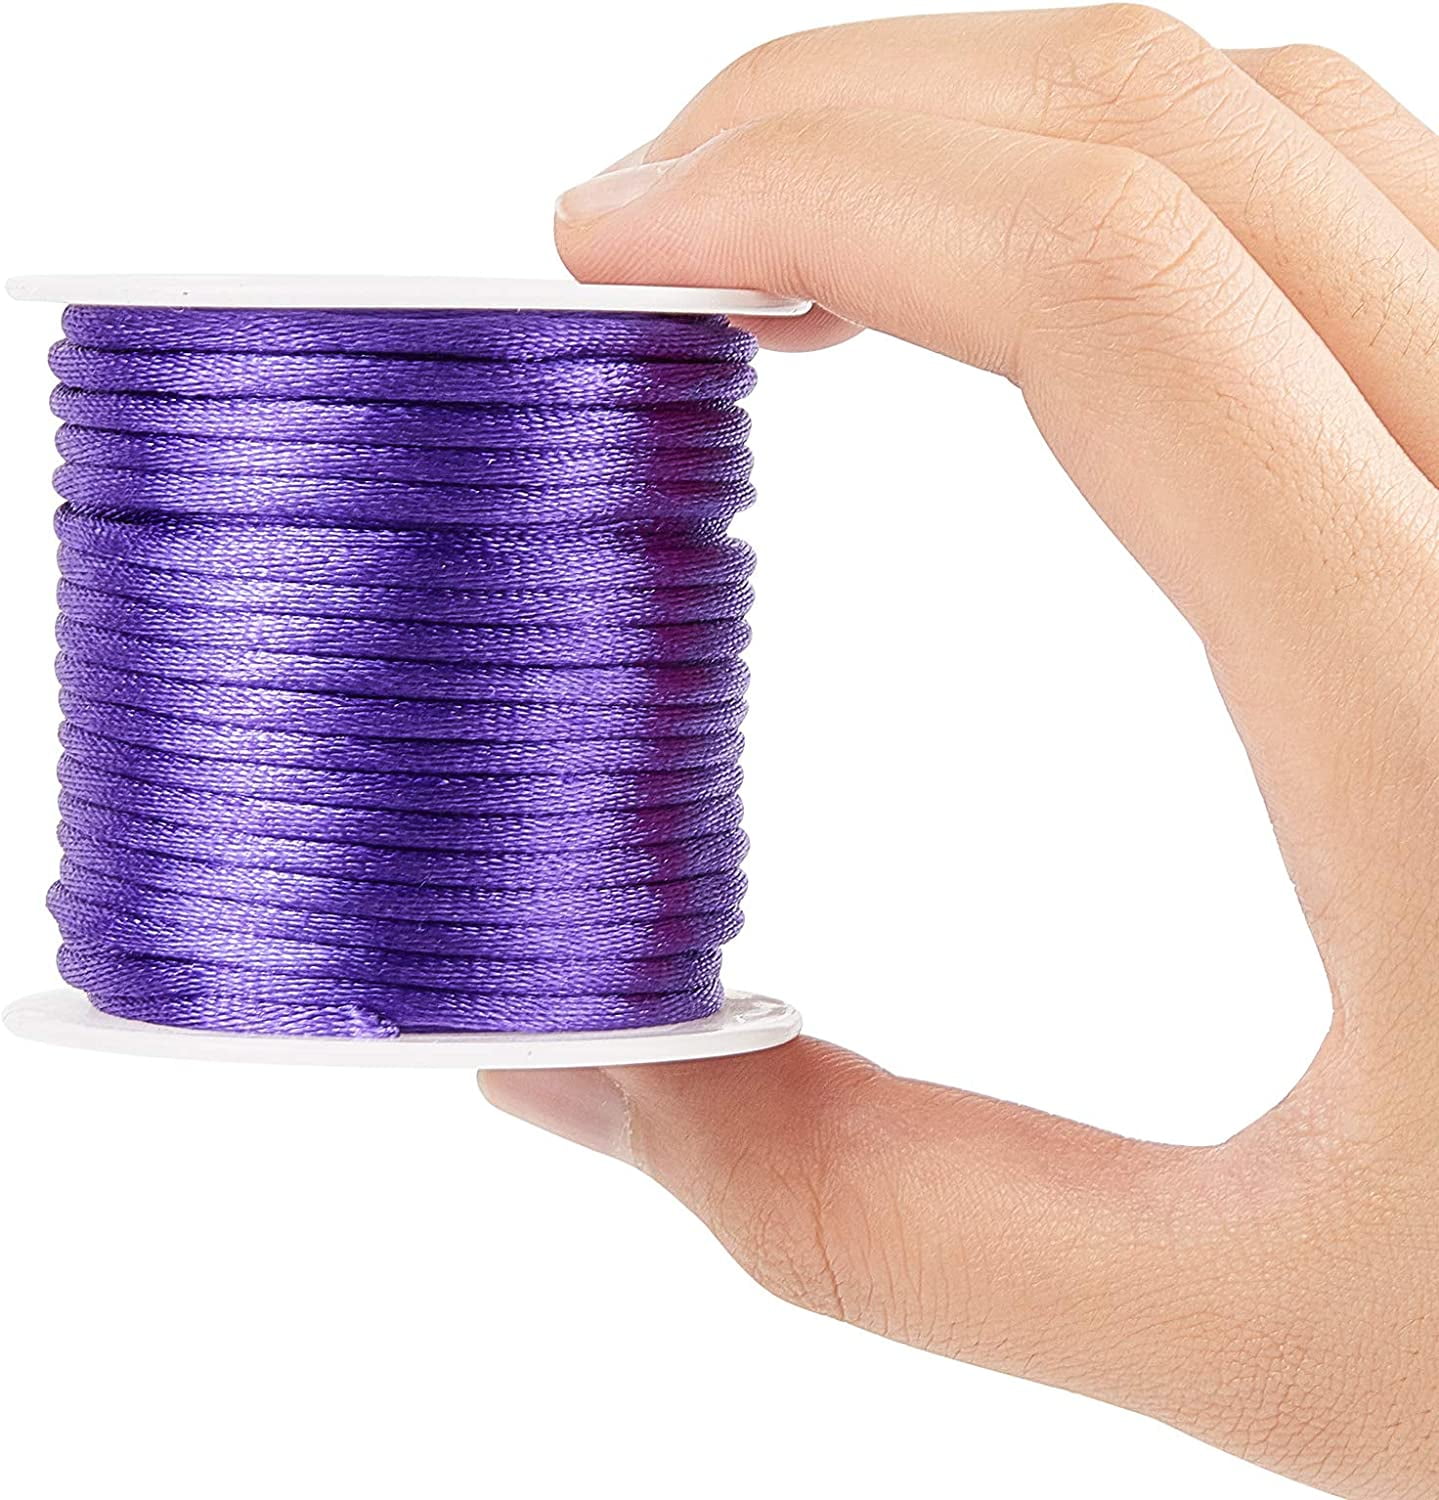 1roll 2mm Nylon String 40 Yards Rattail Satin Cords Tail Cord Bracelet  String Thread Chinese Knotting Cord For Braid Hair Jewelry Making Crafting  Chri